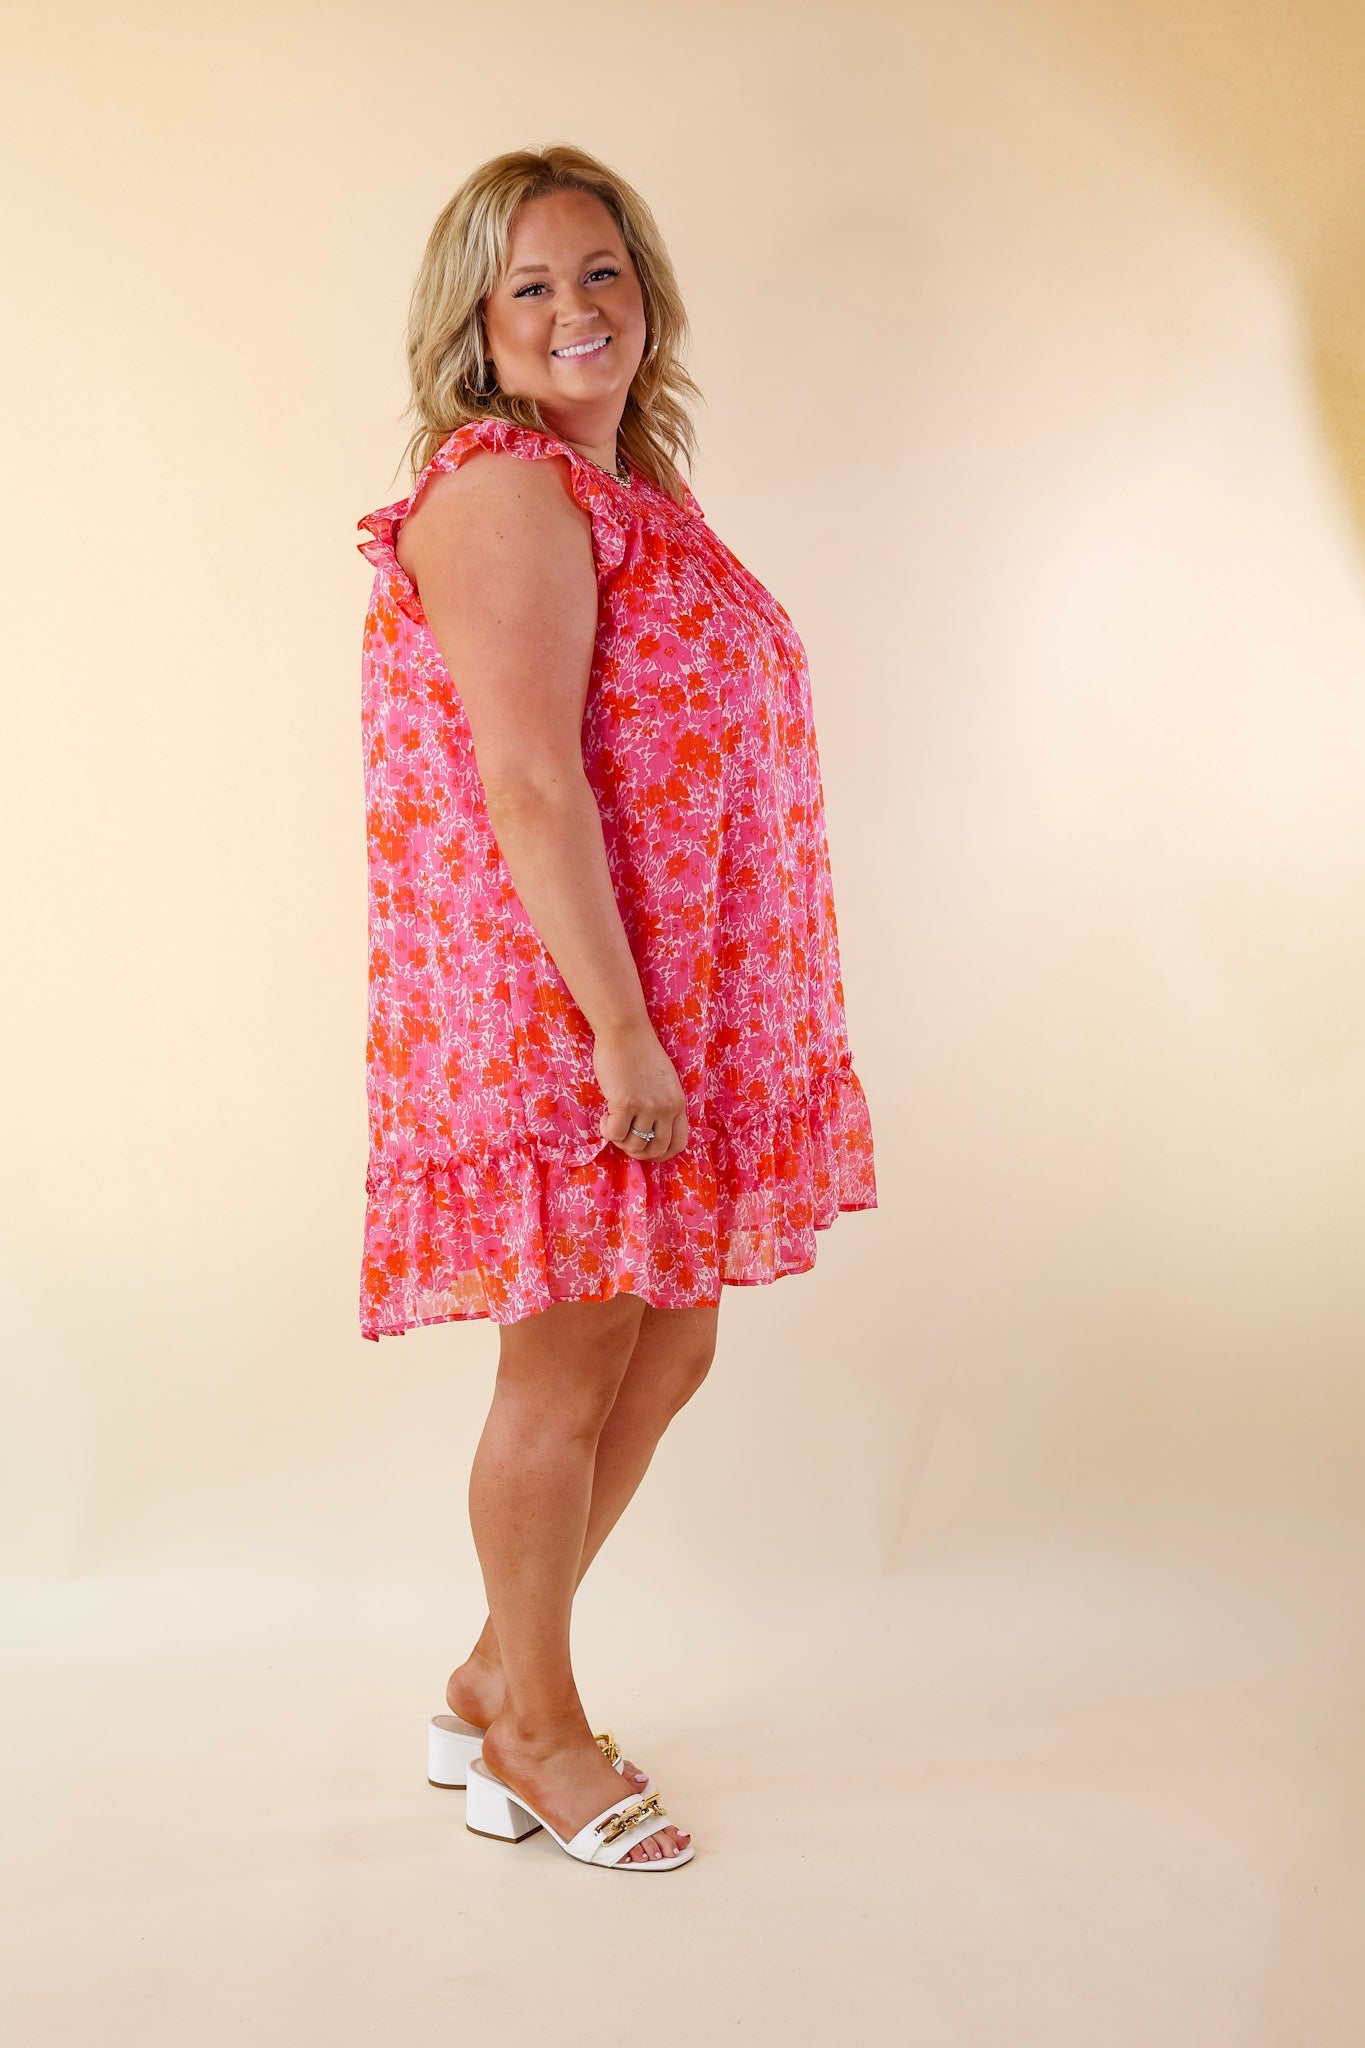 New To The Scene Floral Dress with Ruffle Cap Sleeves in Red and Pink - Giddy Up Glamour Boutique